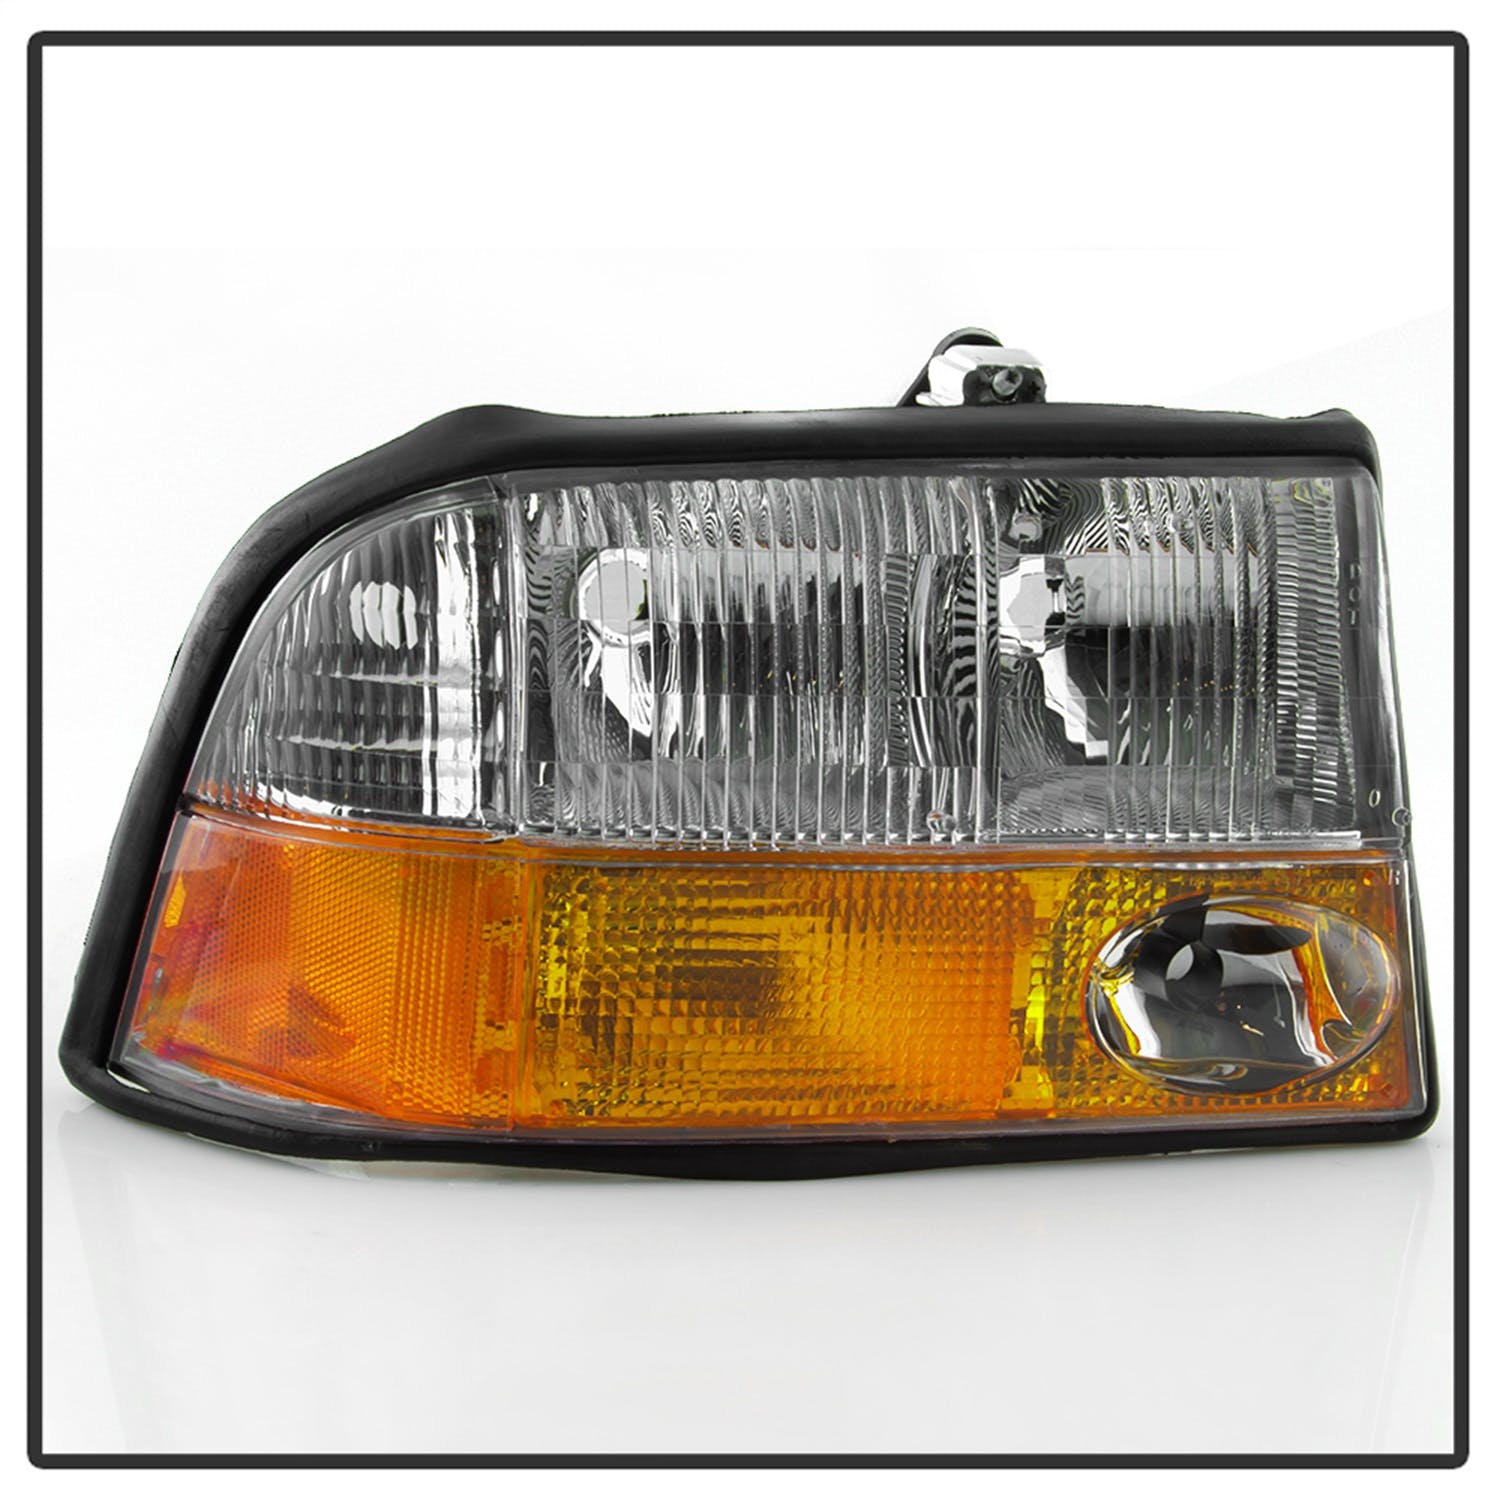 XTUNE POWER 9042690 GMC S 15 Sonoma 98 04 (with Fog Lights Models Only) GMC Jimmy S 15 98 01 (with Fog Lights Models Only) Oldsmobile Bravada 98 01 (with Fog Lights Models Only) OEM Style Headlights With Amber Bumper Chrome